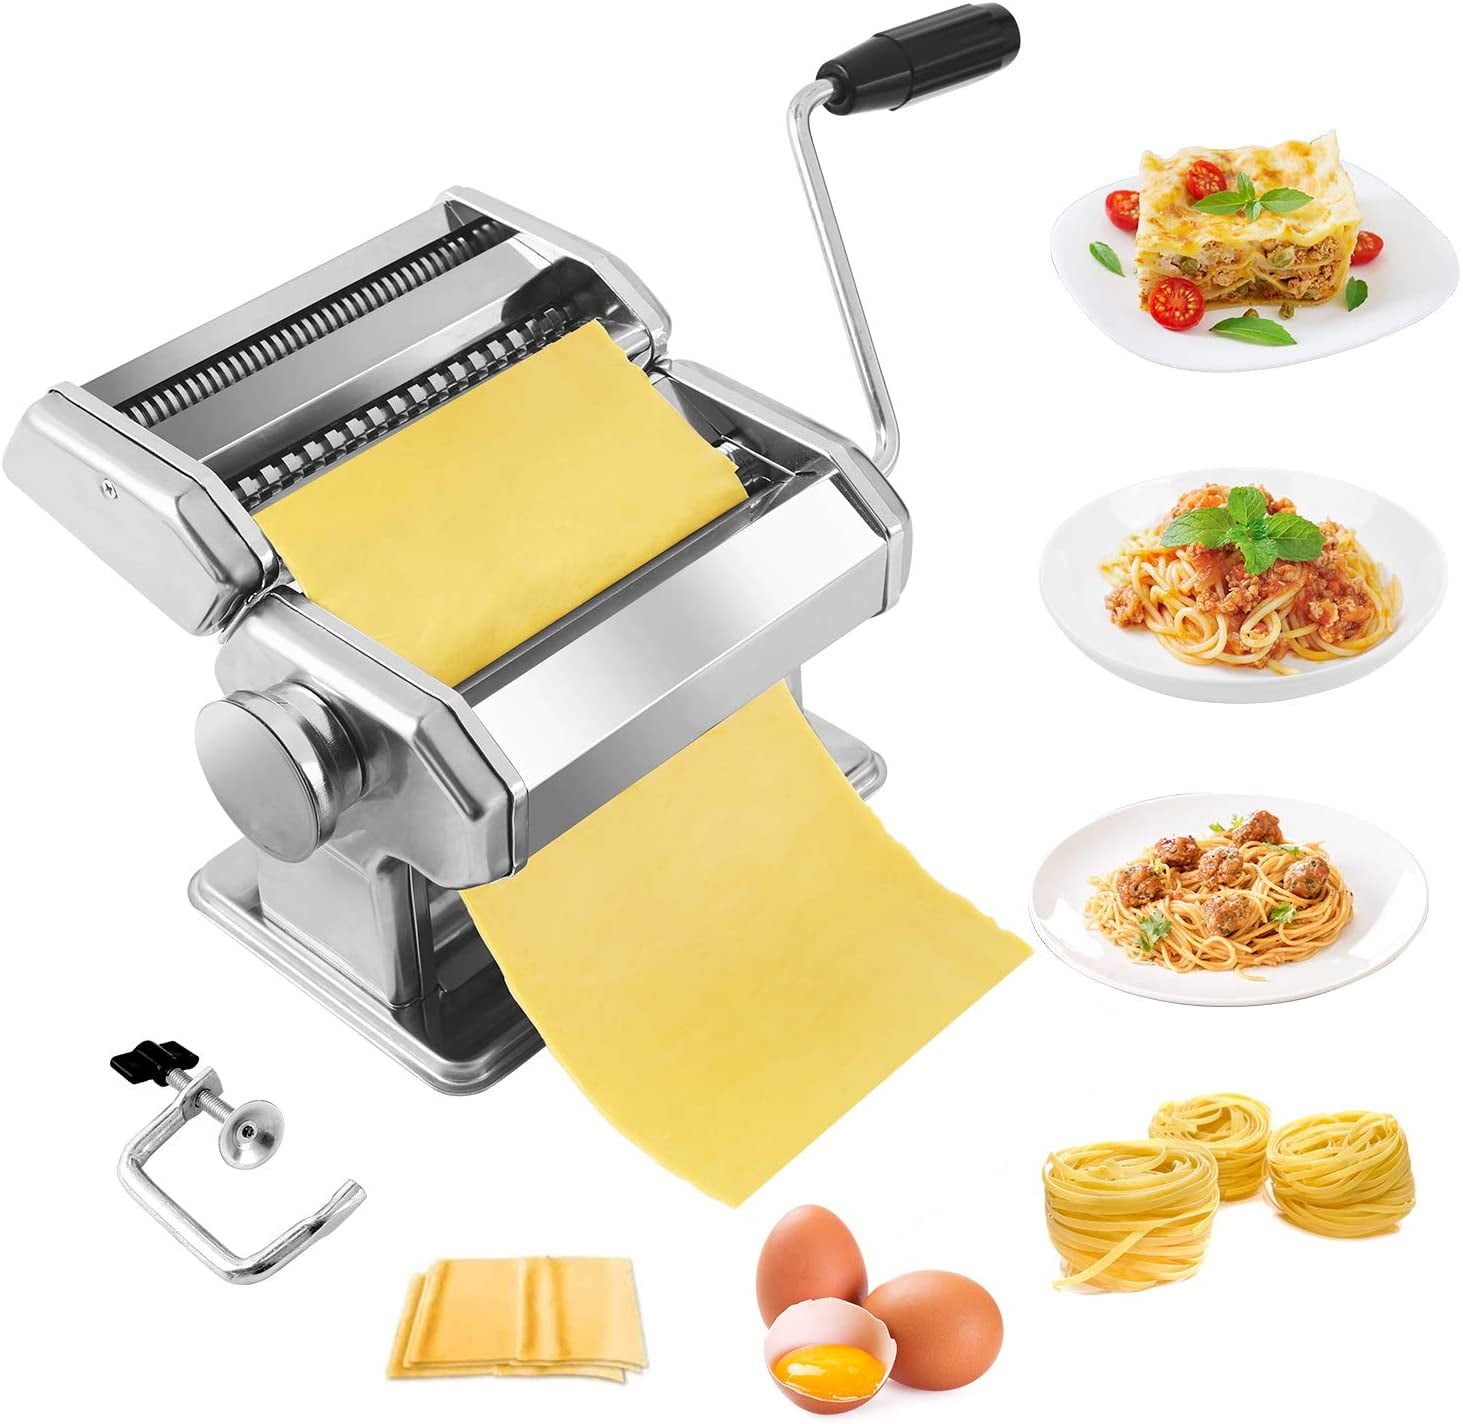 Helm Levering zwaartekracht Pasta Maker,Stainless Steel Manual Pasta Maker Machine With 8 Adjustable  Thickness Settings,2 Blades Noodle Cutter, Perfect for Homemade Spaghetti,  Fettuccini, Lasagna,or Dumpling Skins - Walmart.com